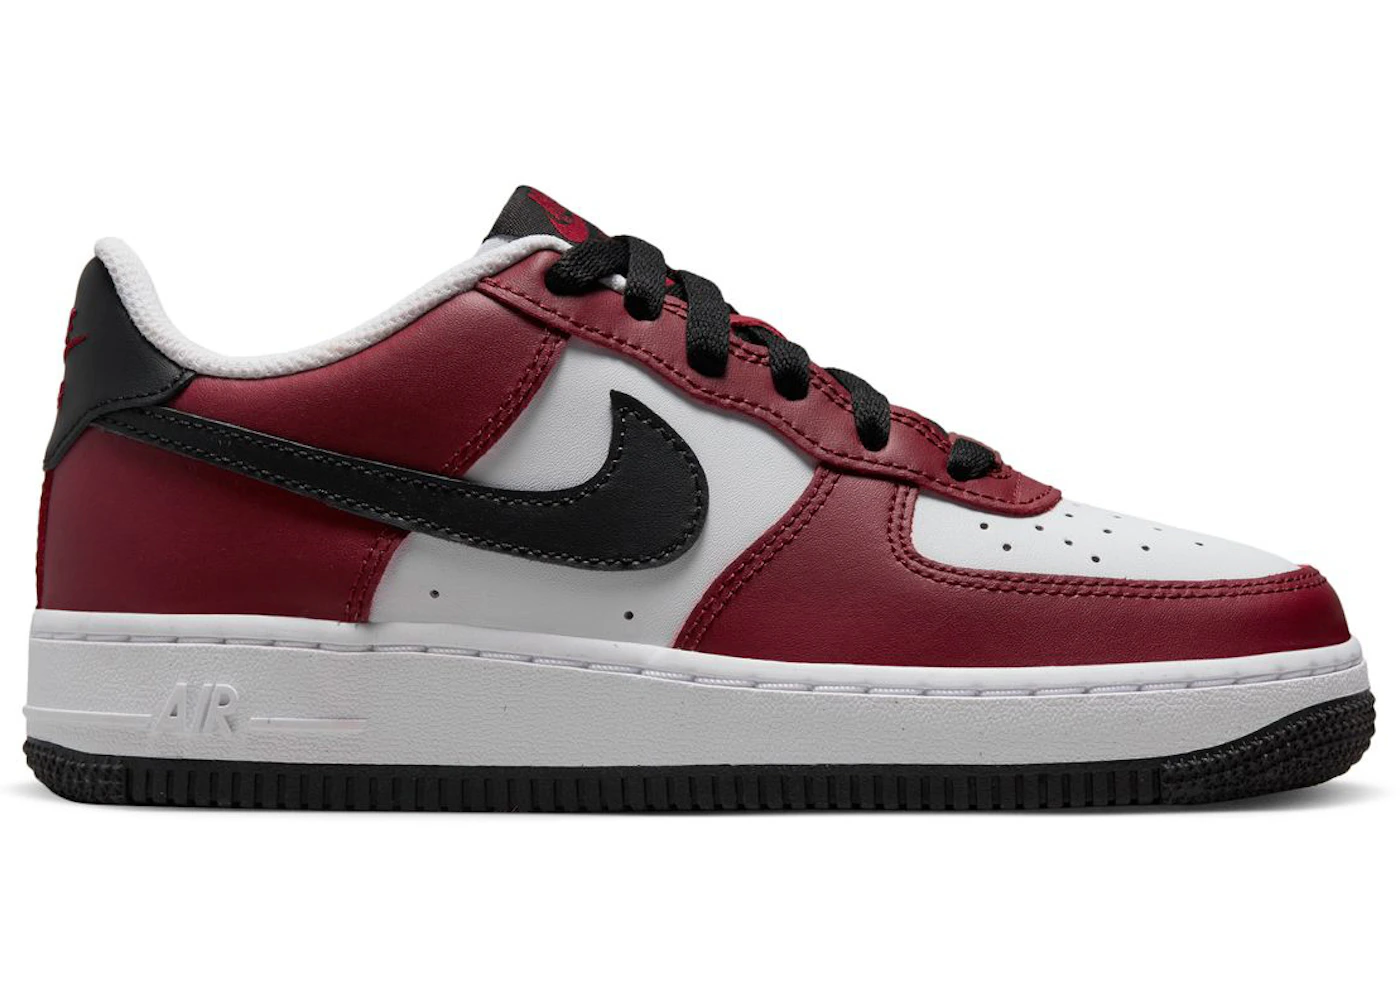 Nike Air Force 1 Low LV8 Team Red (GS) Bambini - FD0300-600 - IT